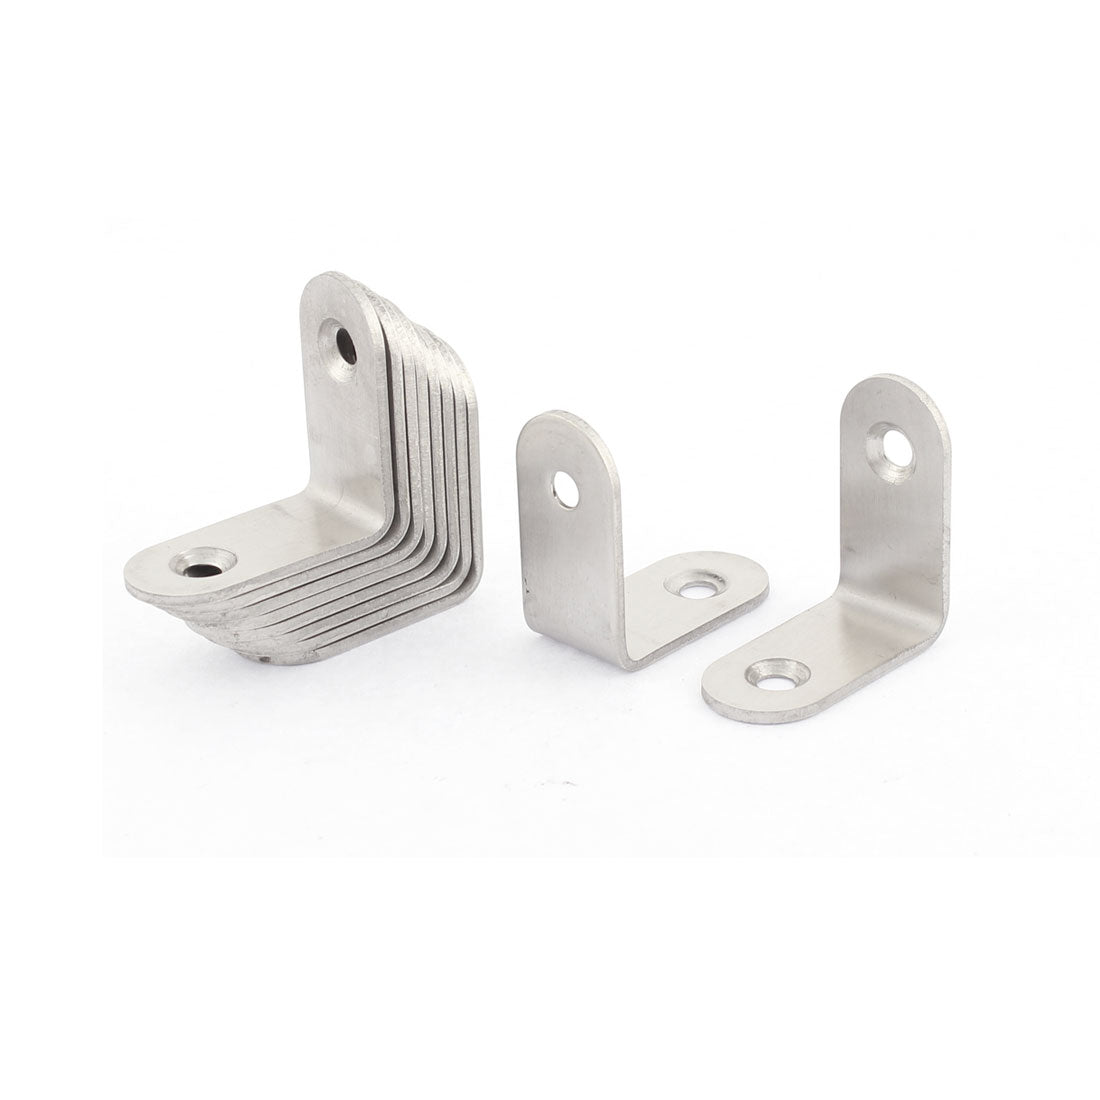 uxcell Uxcell Stainless Steel 90 Degree Fixing Angle Bracket 30 x 30mm 10pcs